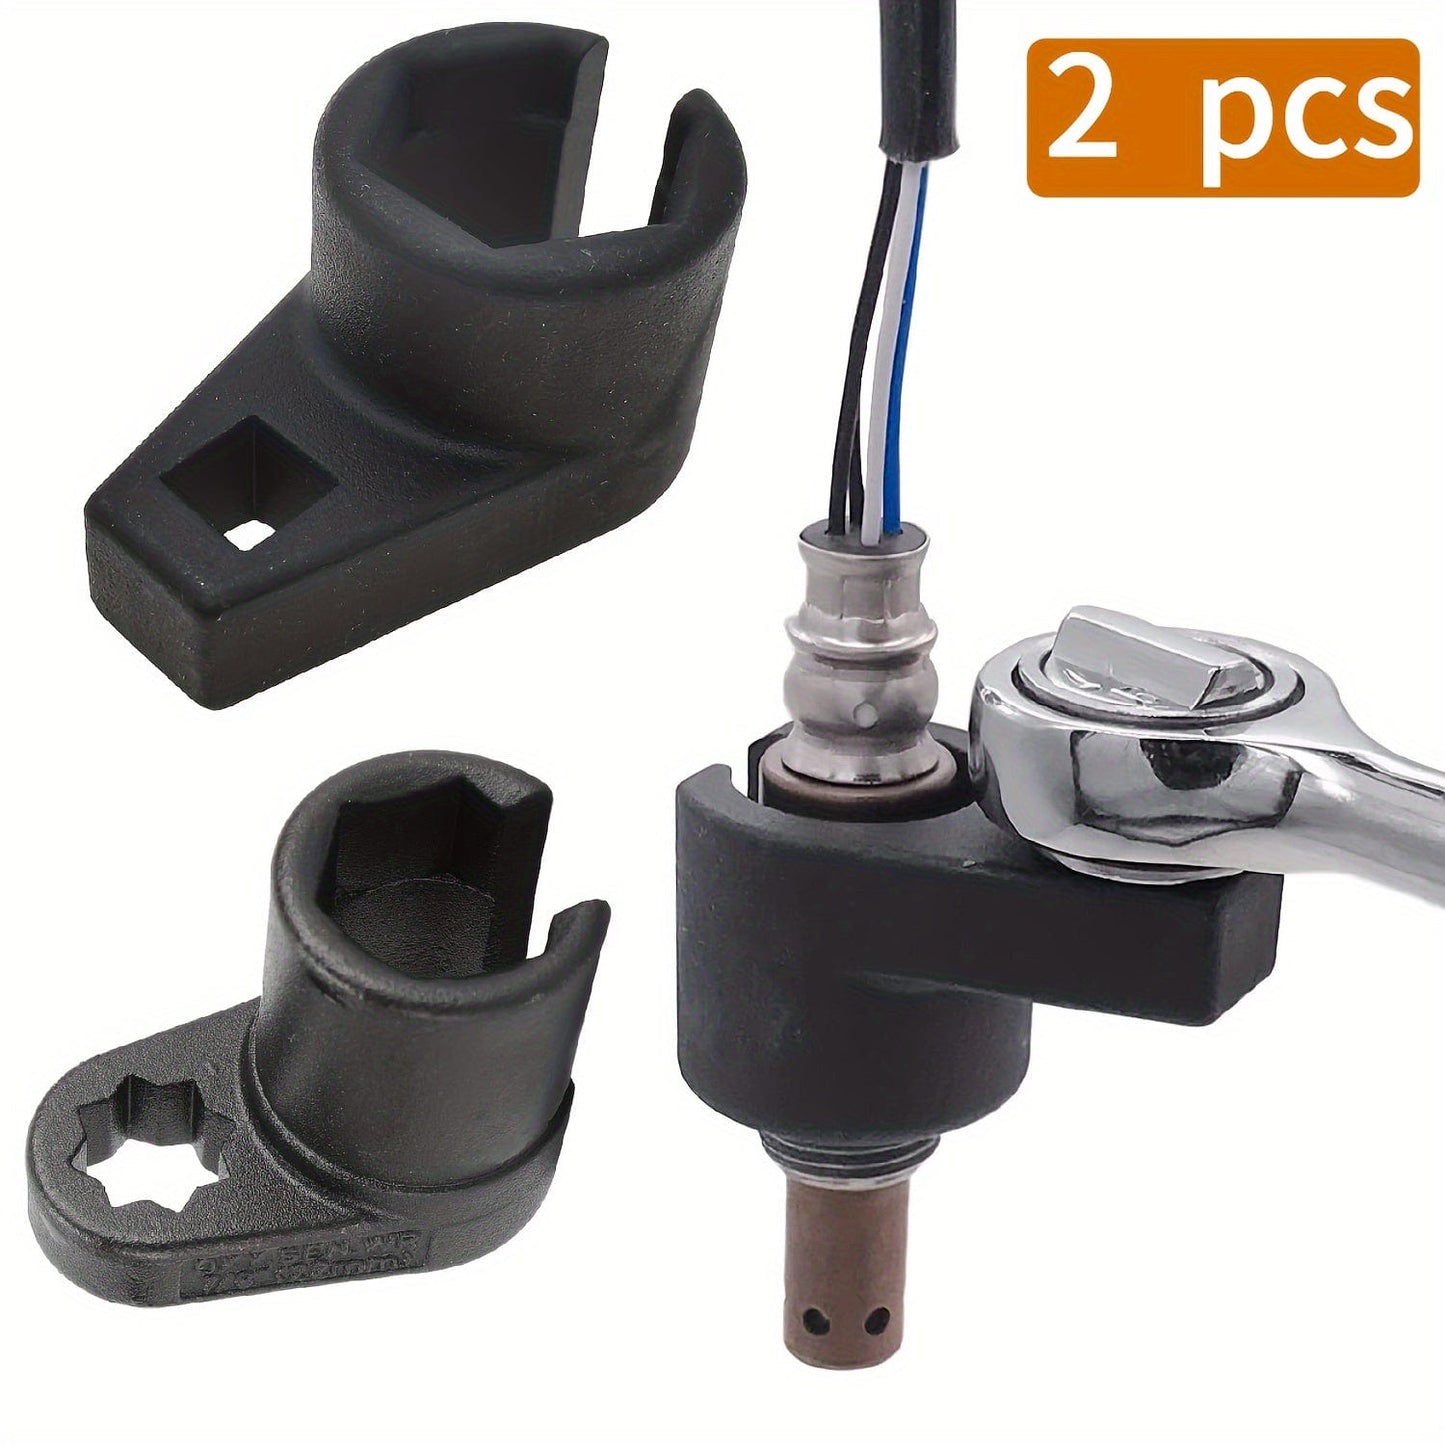 "Offset Oxygen Sensor Socket, 3/8"" Drive, 7/8"" (22mm), Wire Door From The Side Close To The Sensor To Prevent Wire Damage, For Most Models"